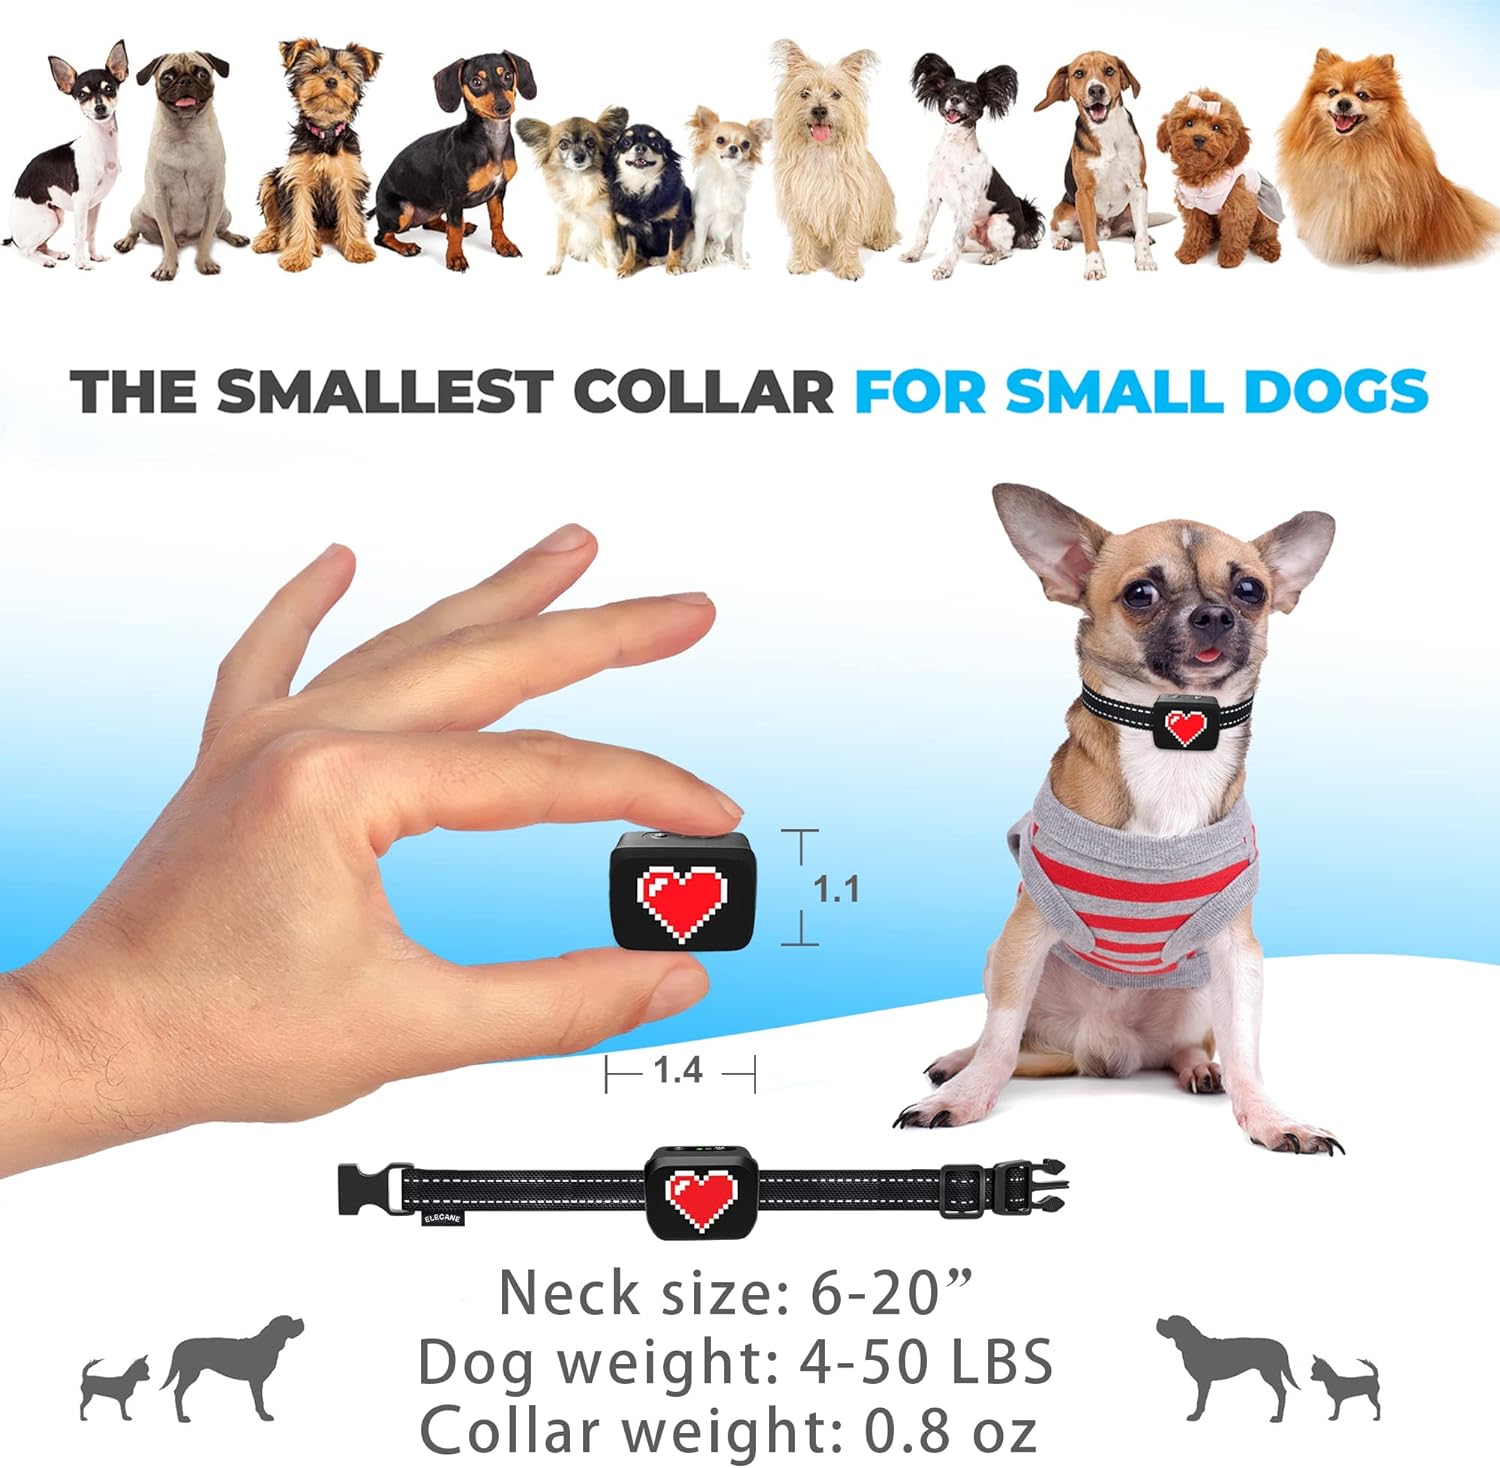 Small Dog Bark Collar Rechargeable – Smallest Bark Collar for Small Dogs 5-15lbs - Most Humane Stop Barking Collar - Dog Training No Shock Anti Bark Collar - Pet Bark Control Device (Pink)